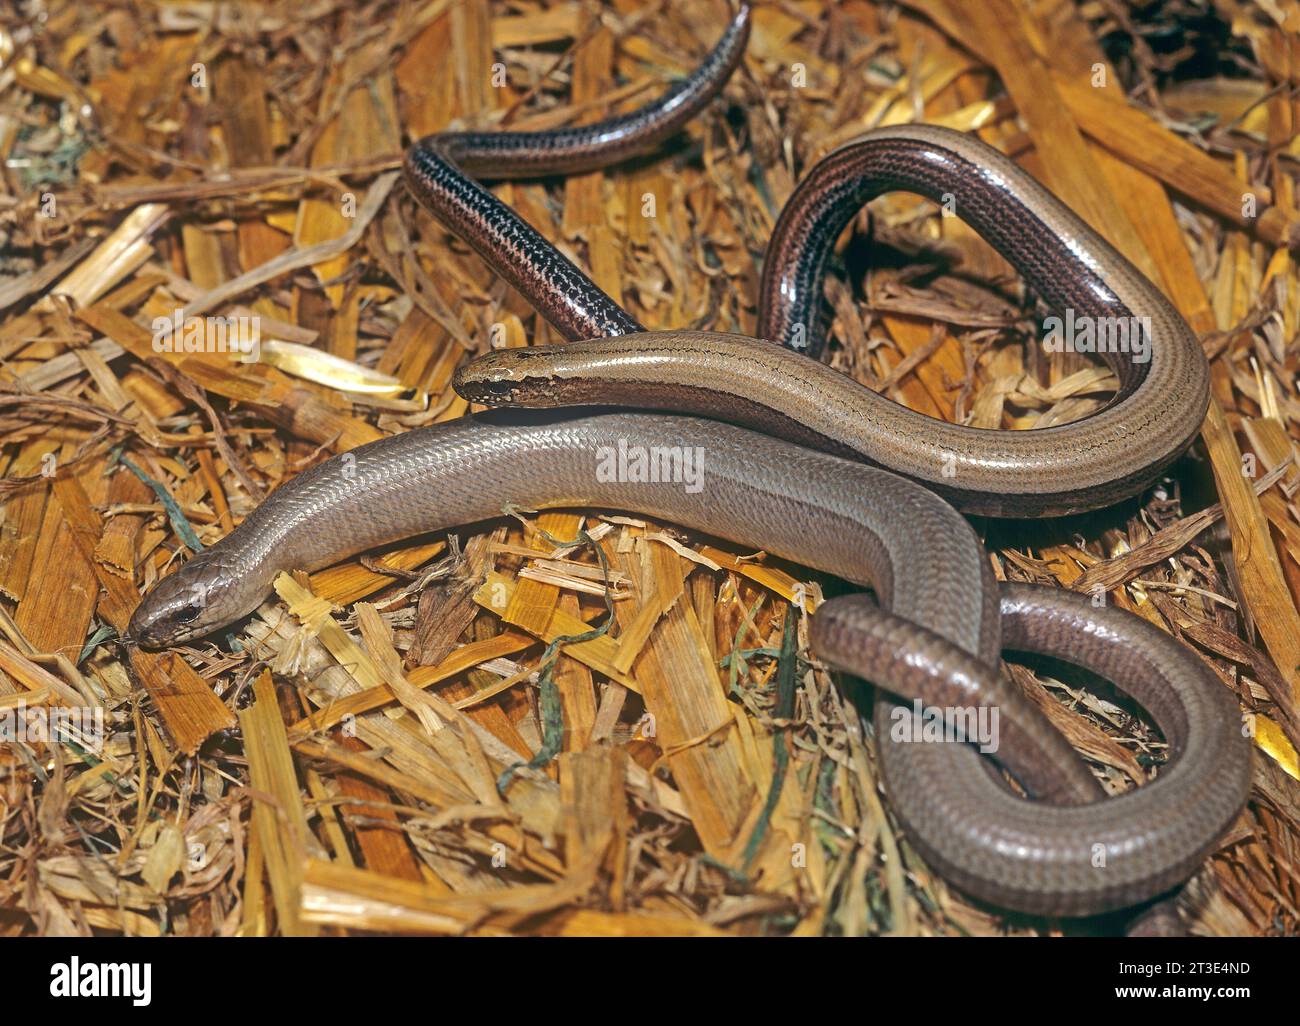 Slpw worm couple discovered under an old straw bale. The female is larger and the smaller male has a golden hue. Anguis fragilis South germany Stock Photo